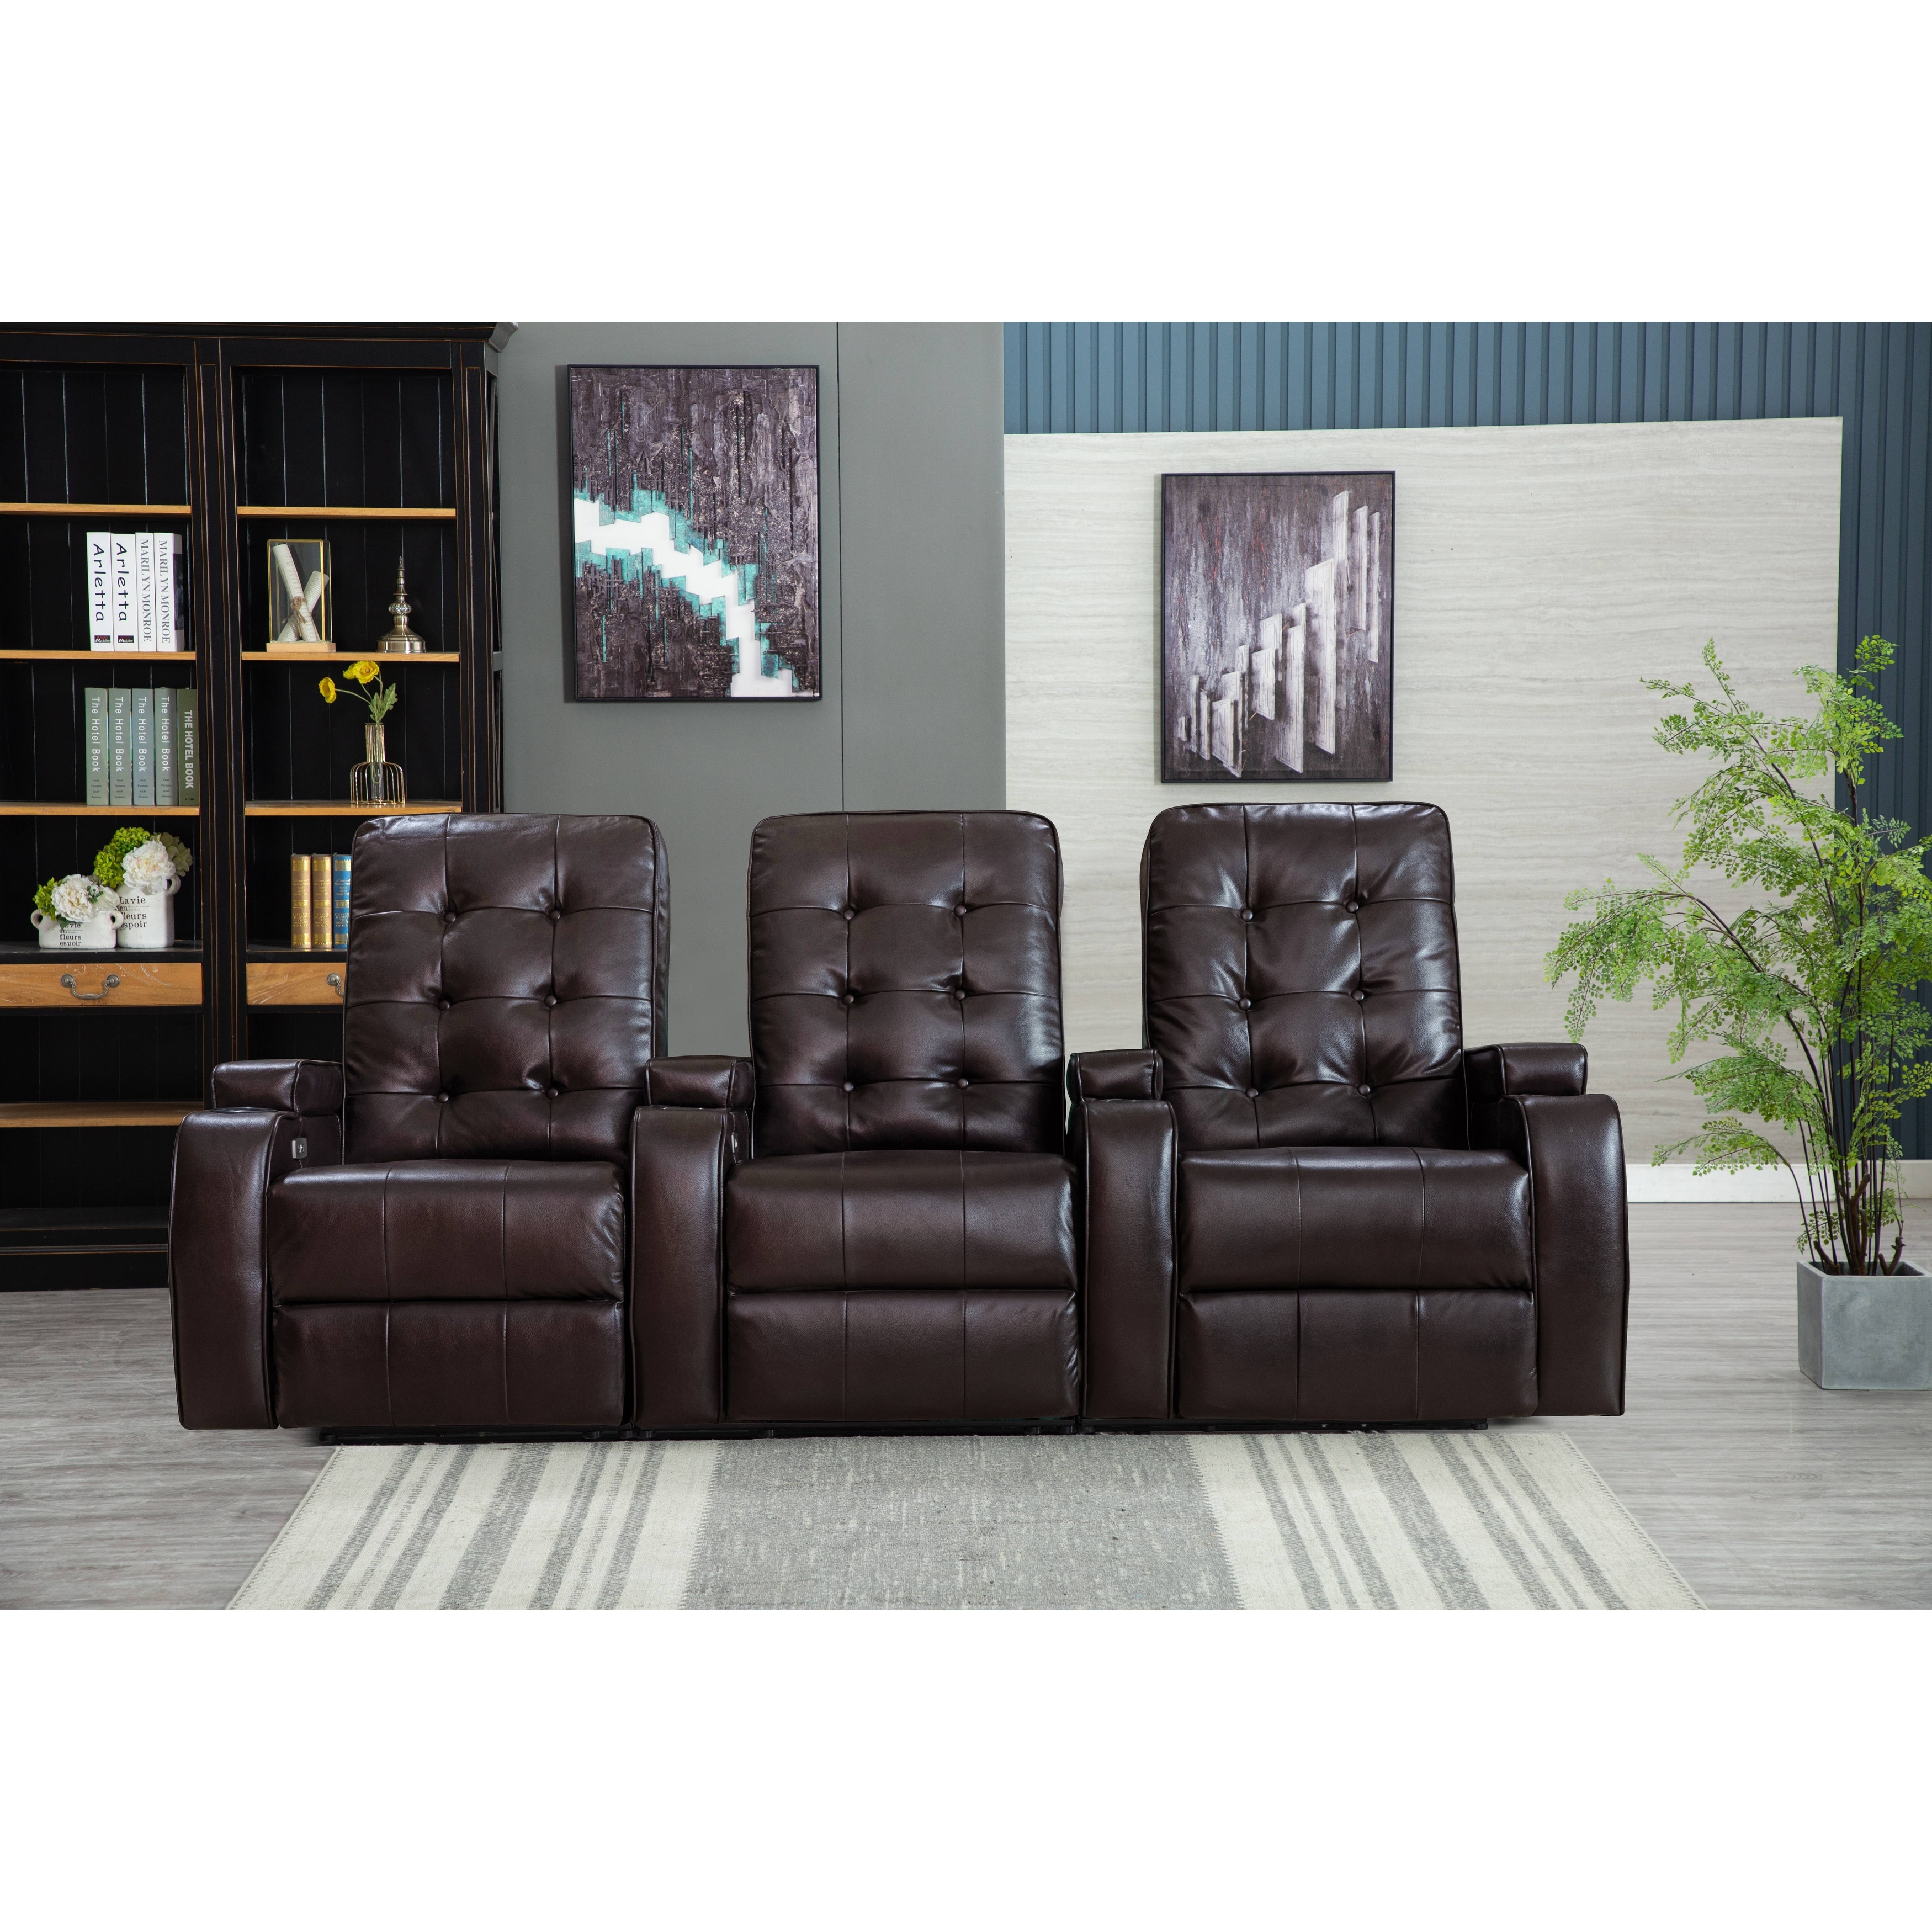 https://ak1.ostkcdn.com/images/products/is/images/direct/88bf637404cbbe53bfd9f124686d15bb8e8ed7cc/Q-Max-Faux-Leather-Cinema-3-Seat-Power-Sofa-Recliner-Home-Theater-Seating-with-Cup-Holders-and-USB-Port.jpg